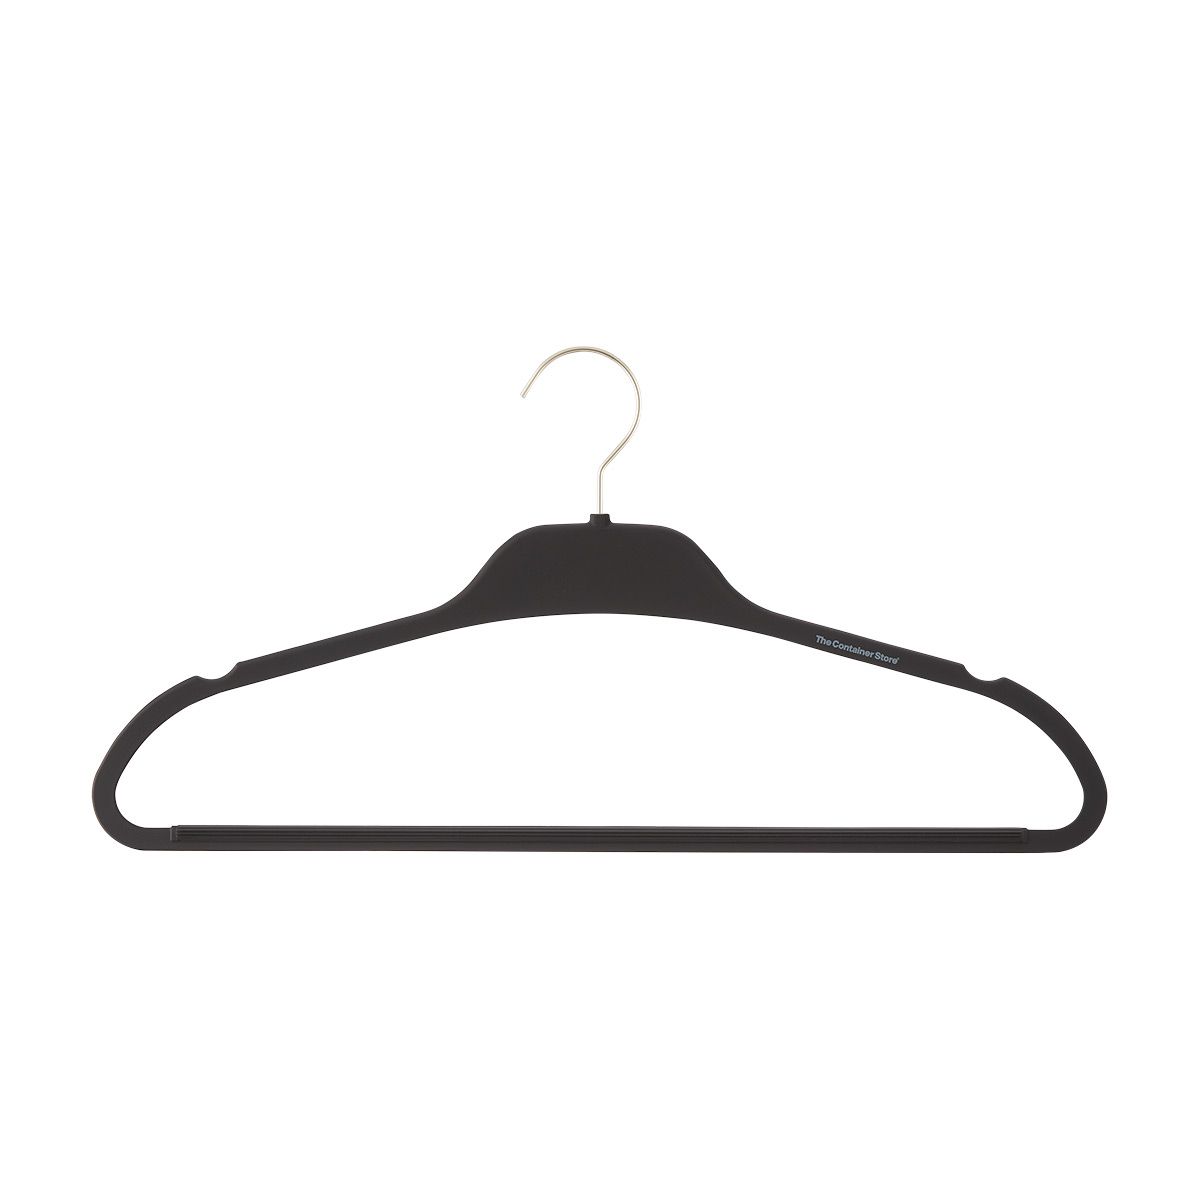 The Container Store Non-Slip Rubberized Hangers with Satin Nickel Hardware | The Container Store